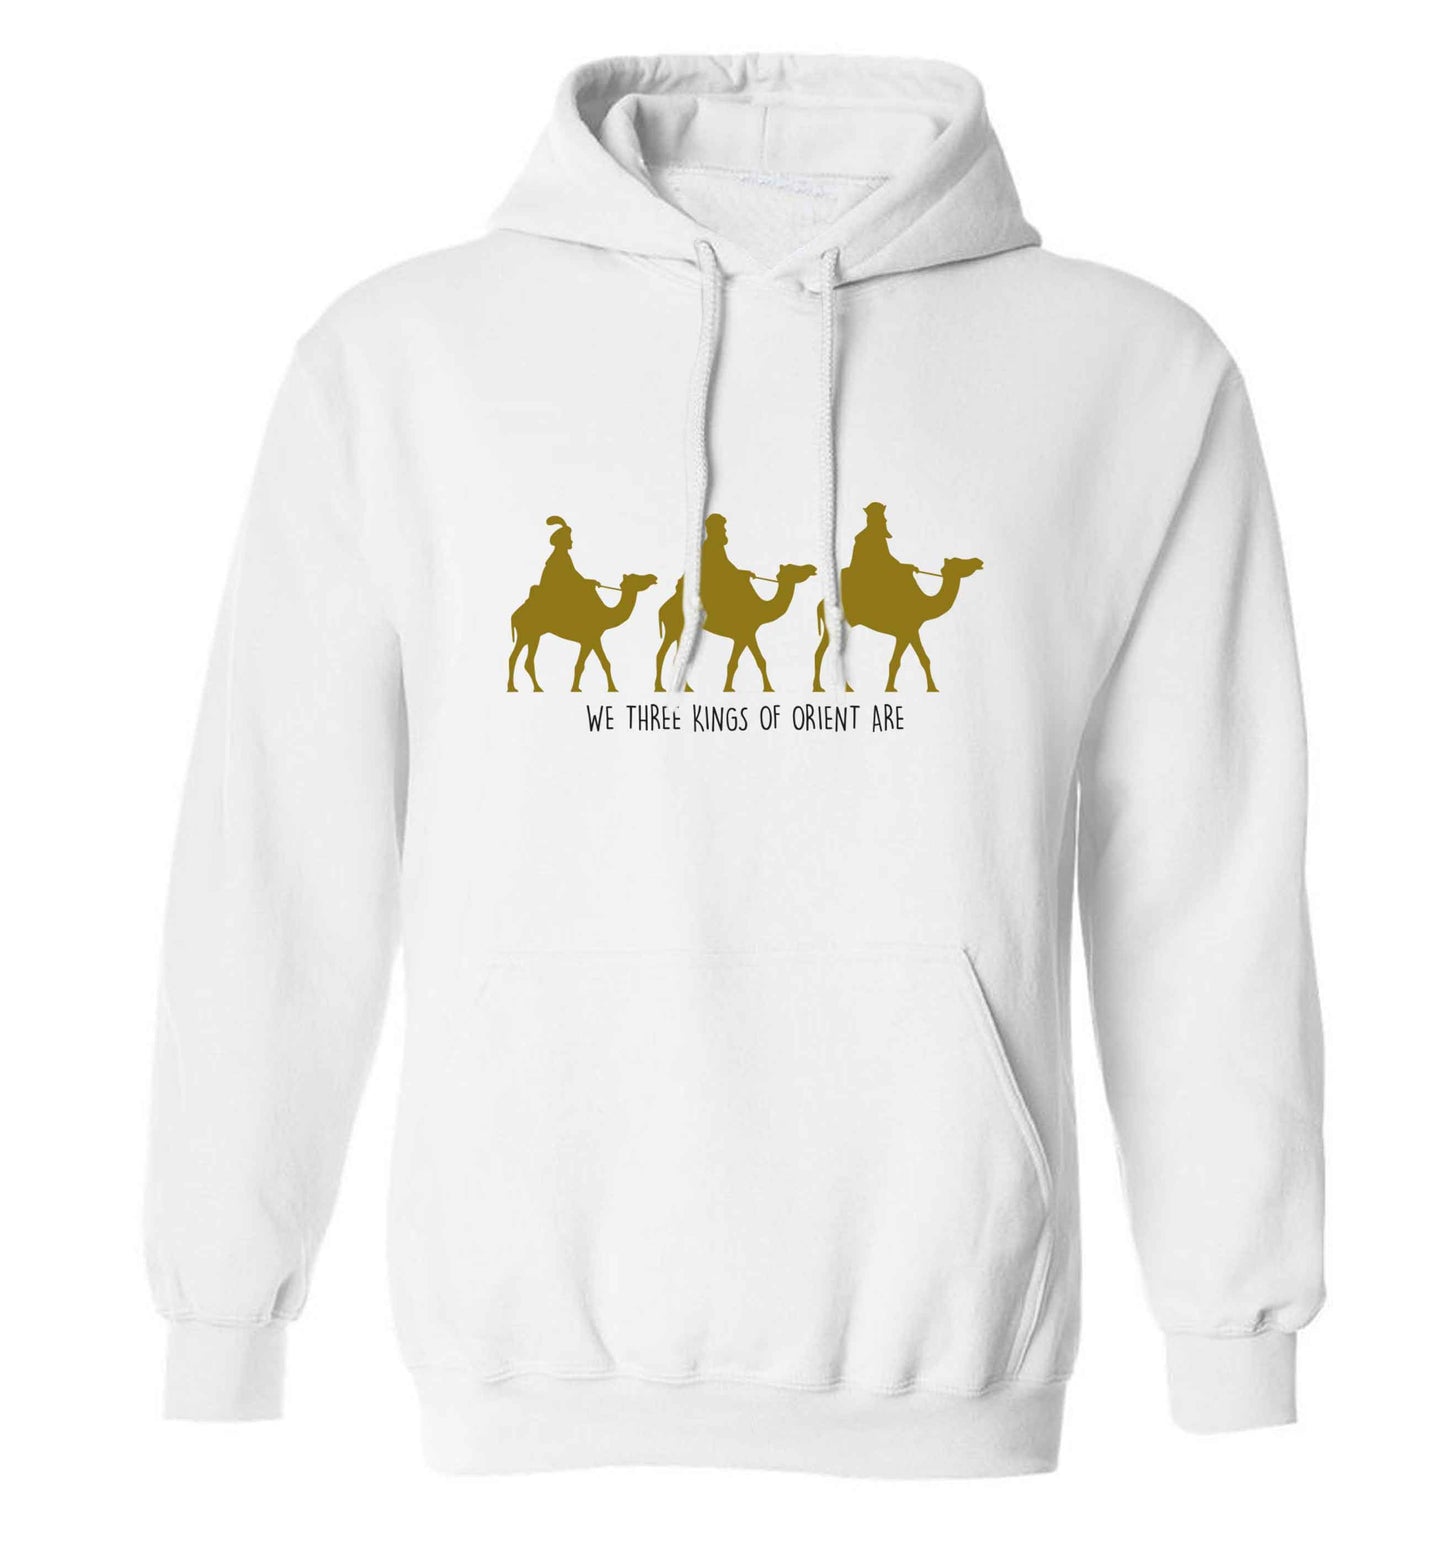 We three kings of orient are adults unisex white hoodie 2XL